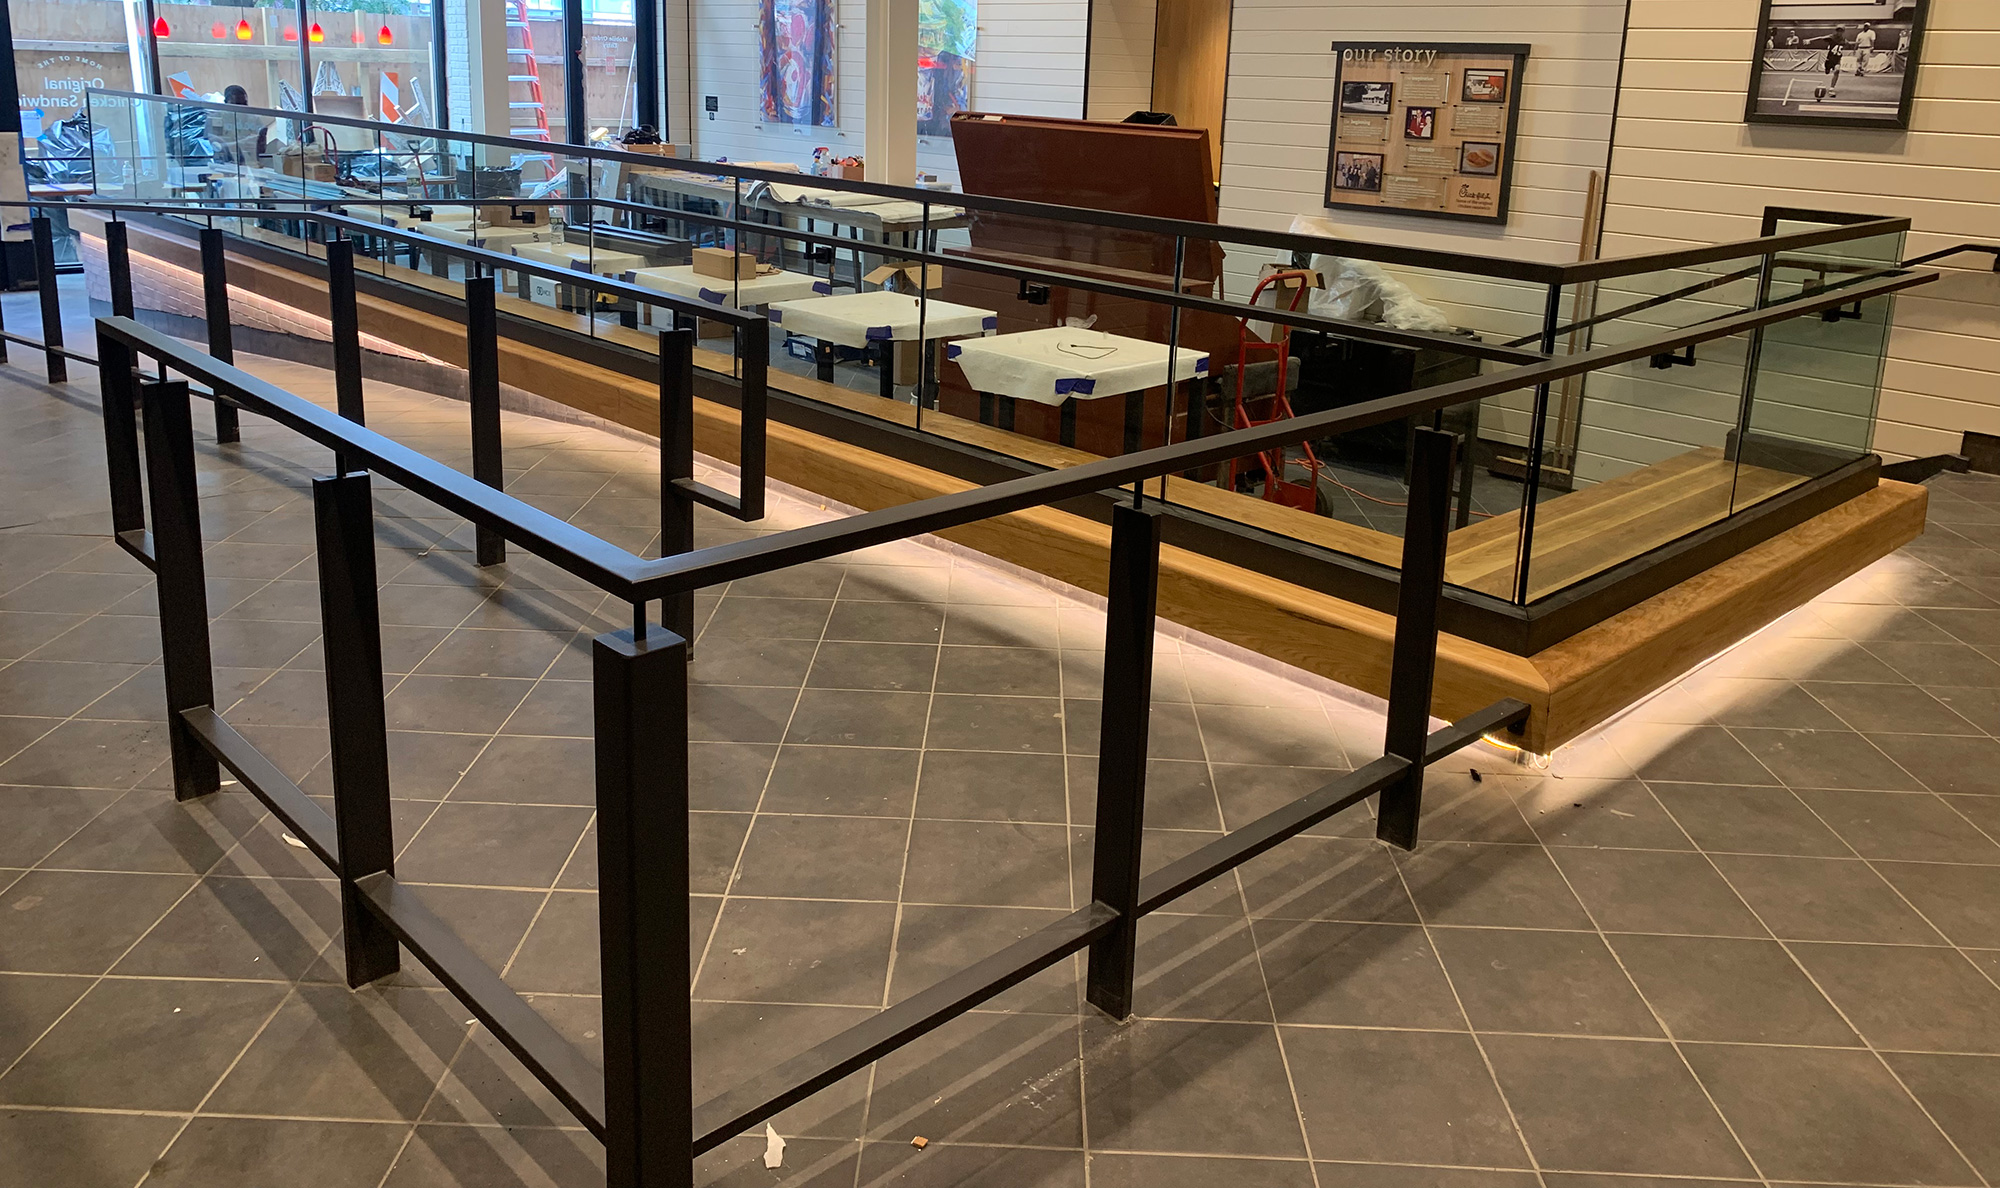 Glass Partitions & Railings - Chick-fil-A,  Brooklyn, NY